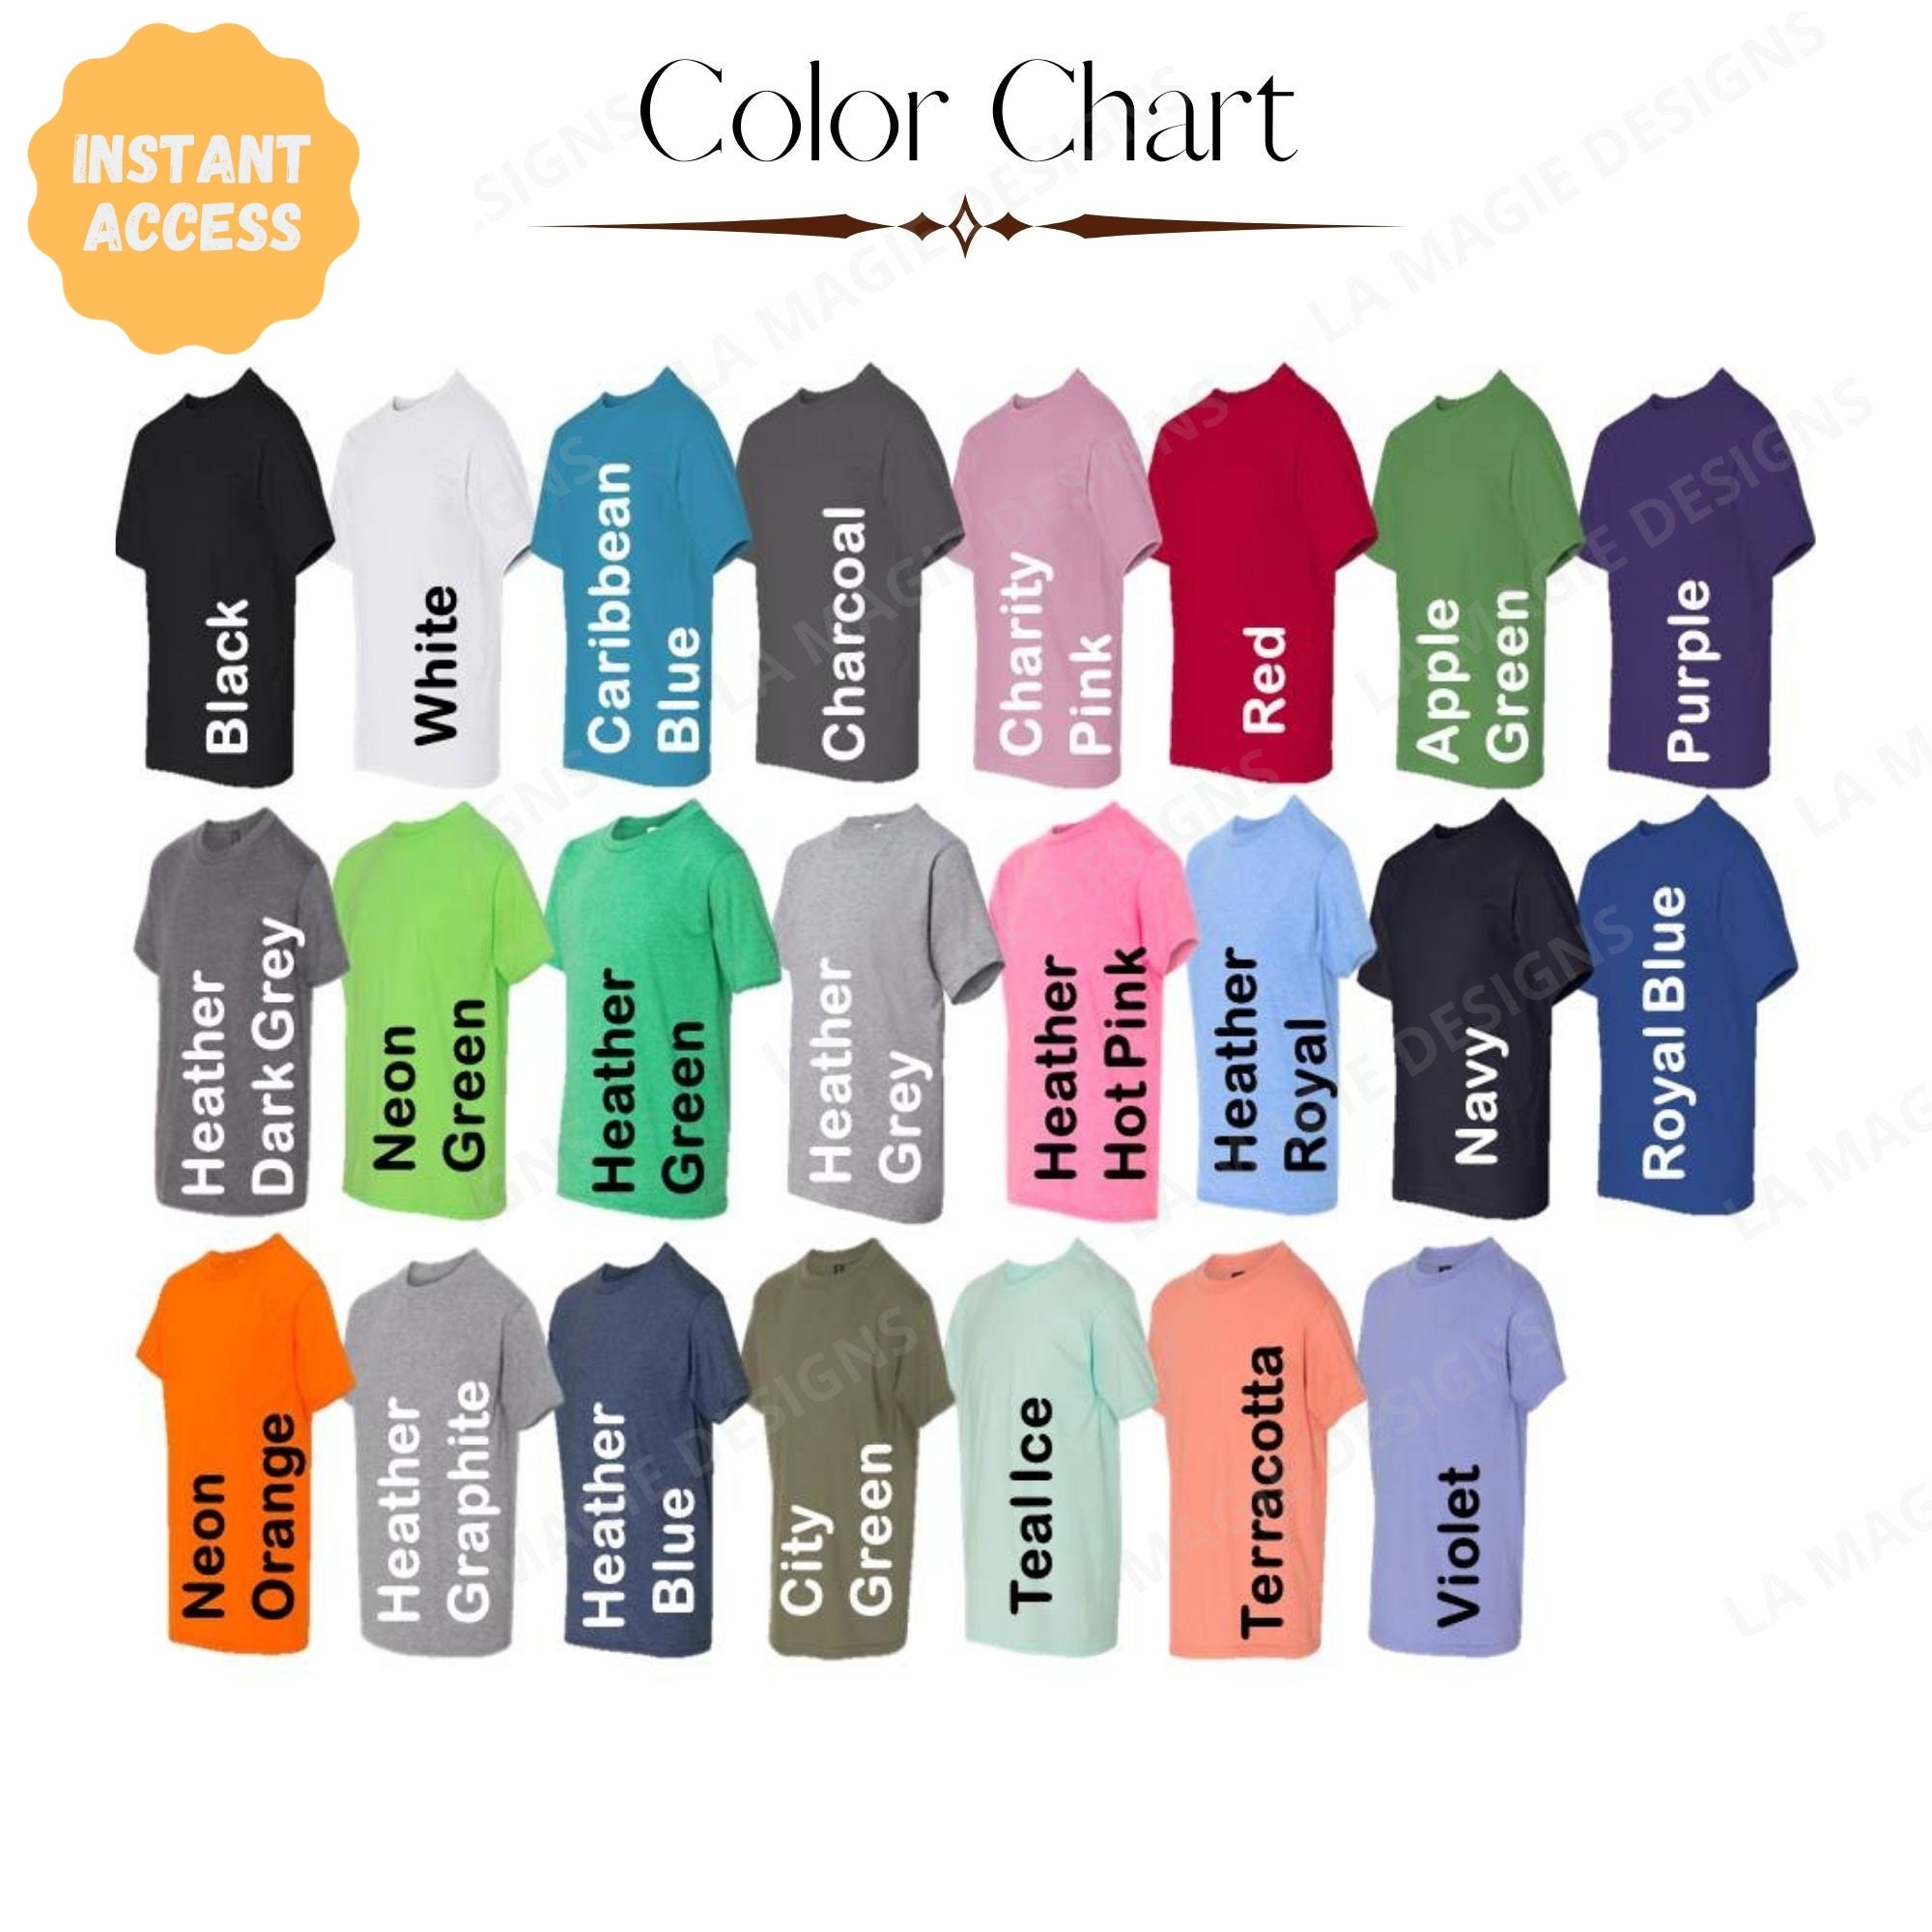 Anvil 990B Color Chart Anvil Youth Lightweight T-shirt anvil 990B Youth ...